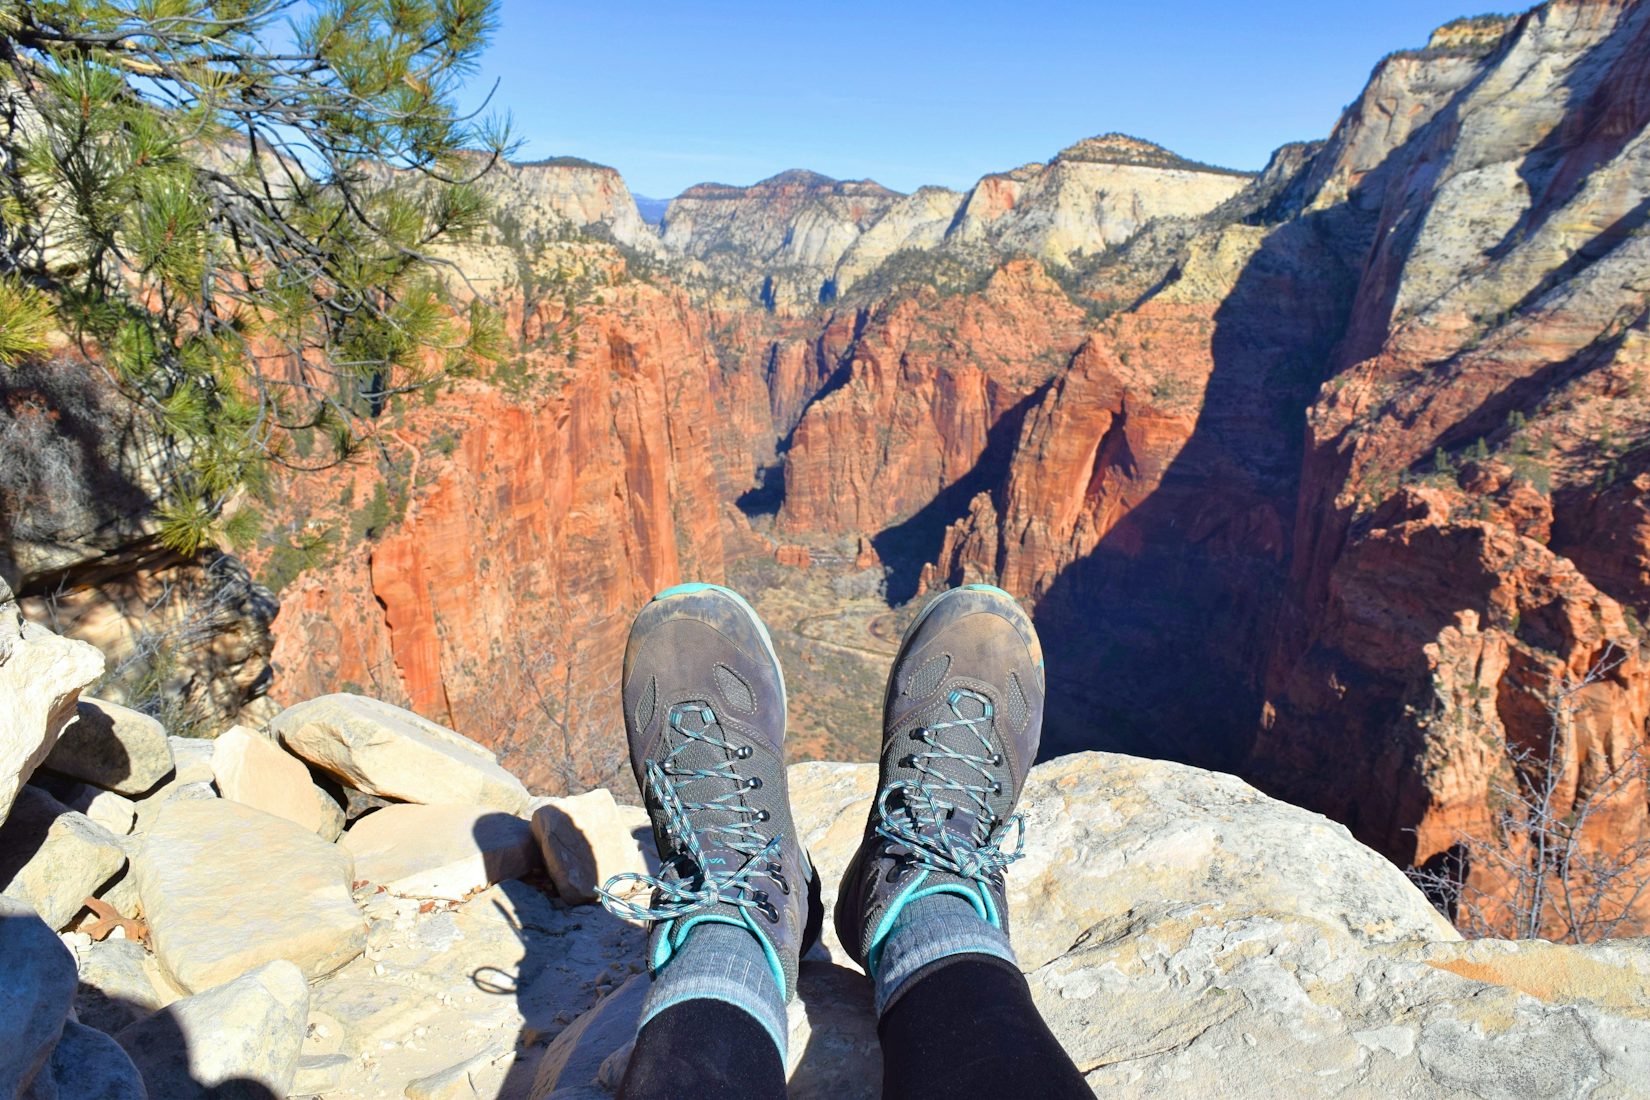 Our Hike to Angels Landing